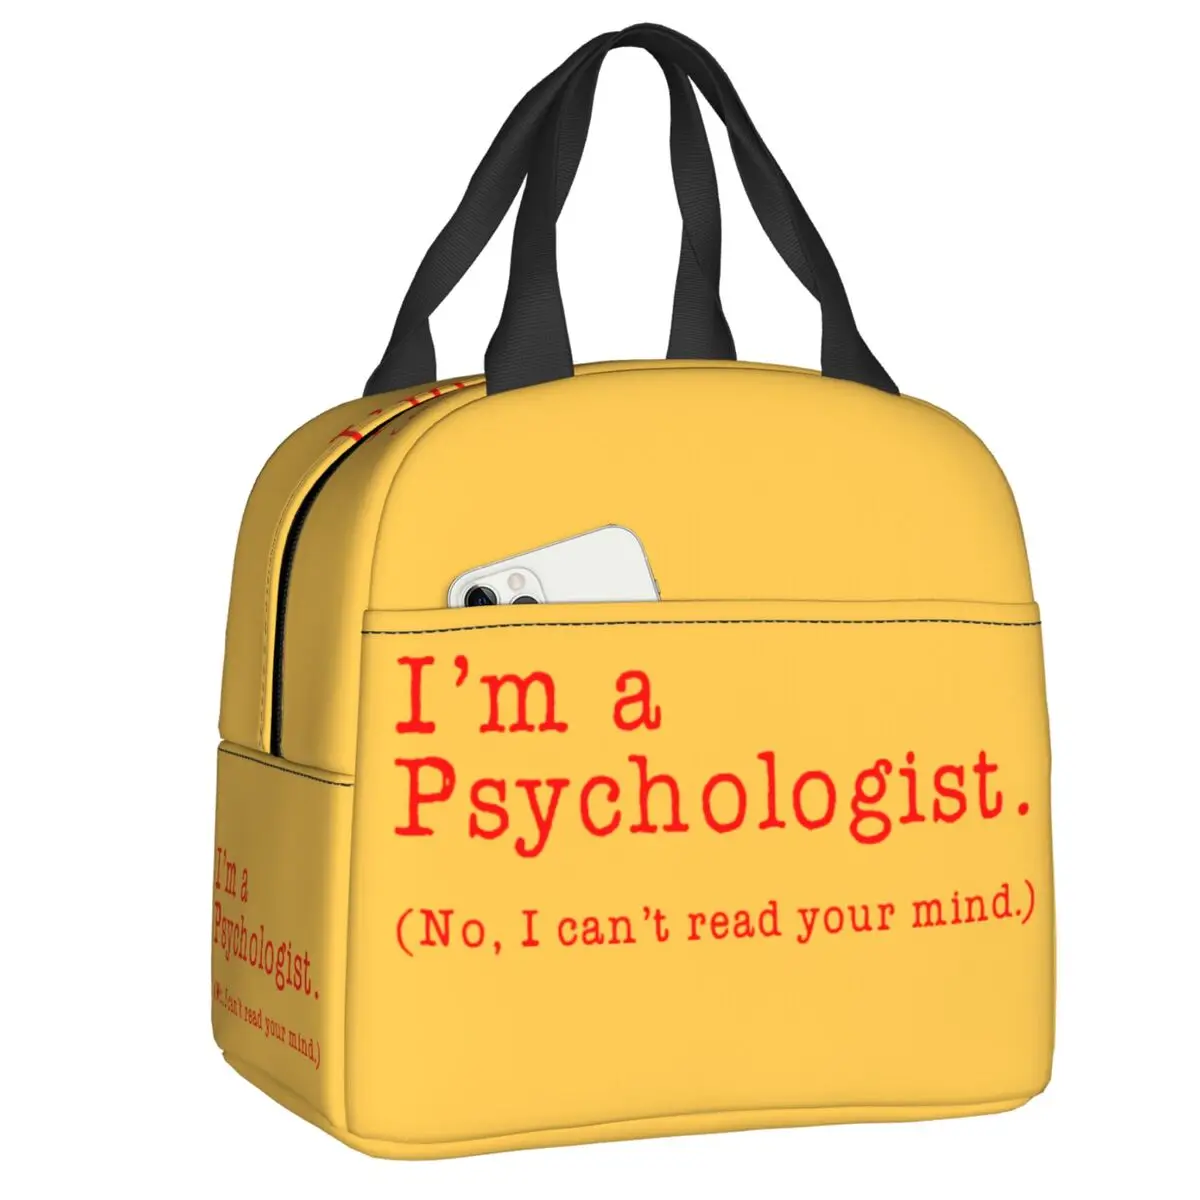 

I'm A Psychologist No I Can't Read Your Mind Lunch Bag Psychologist Thermal Cooler Insulated Lunch Box For Womne Kids Food Bags